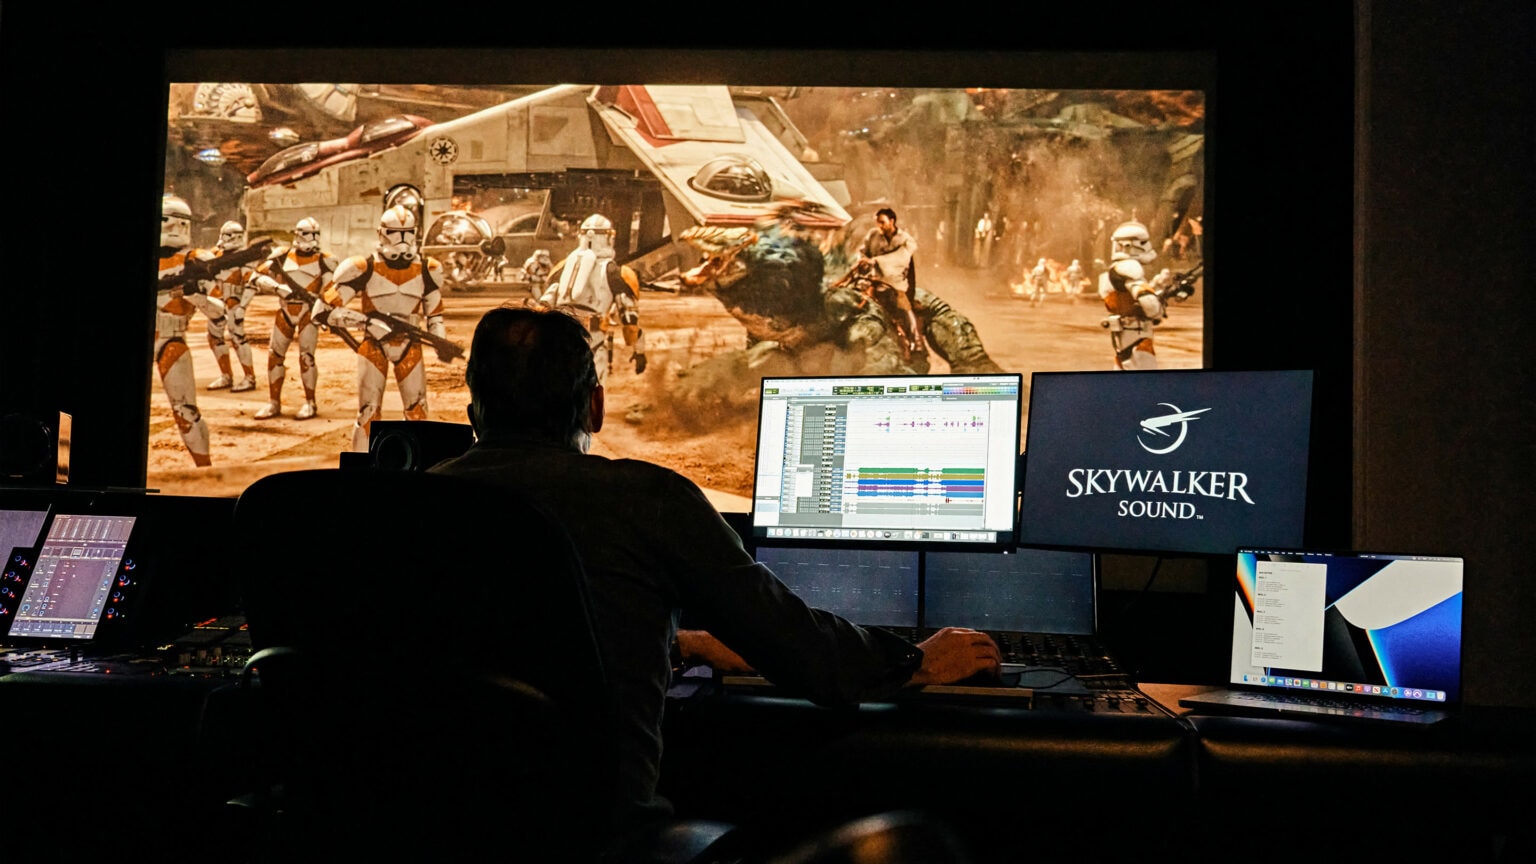 At Skywalker Ranch, Skywalker Sound’s world-class artists create the world’s most recognizable sounds for films like the Star Wars and Indiana Jones franchises.